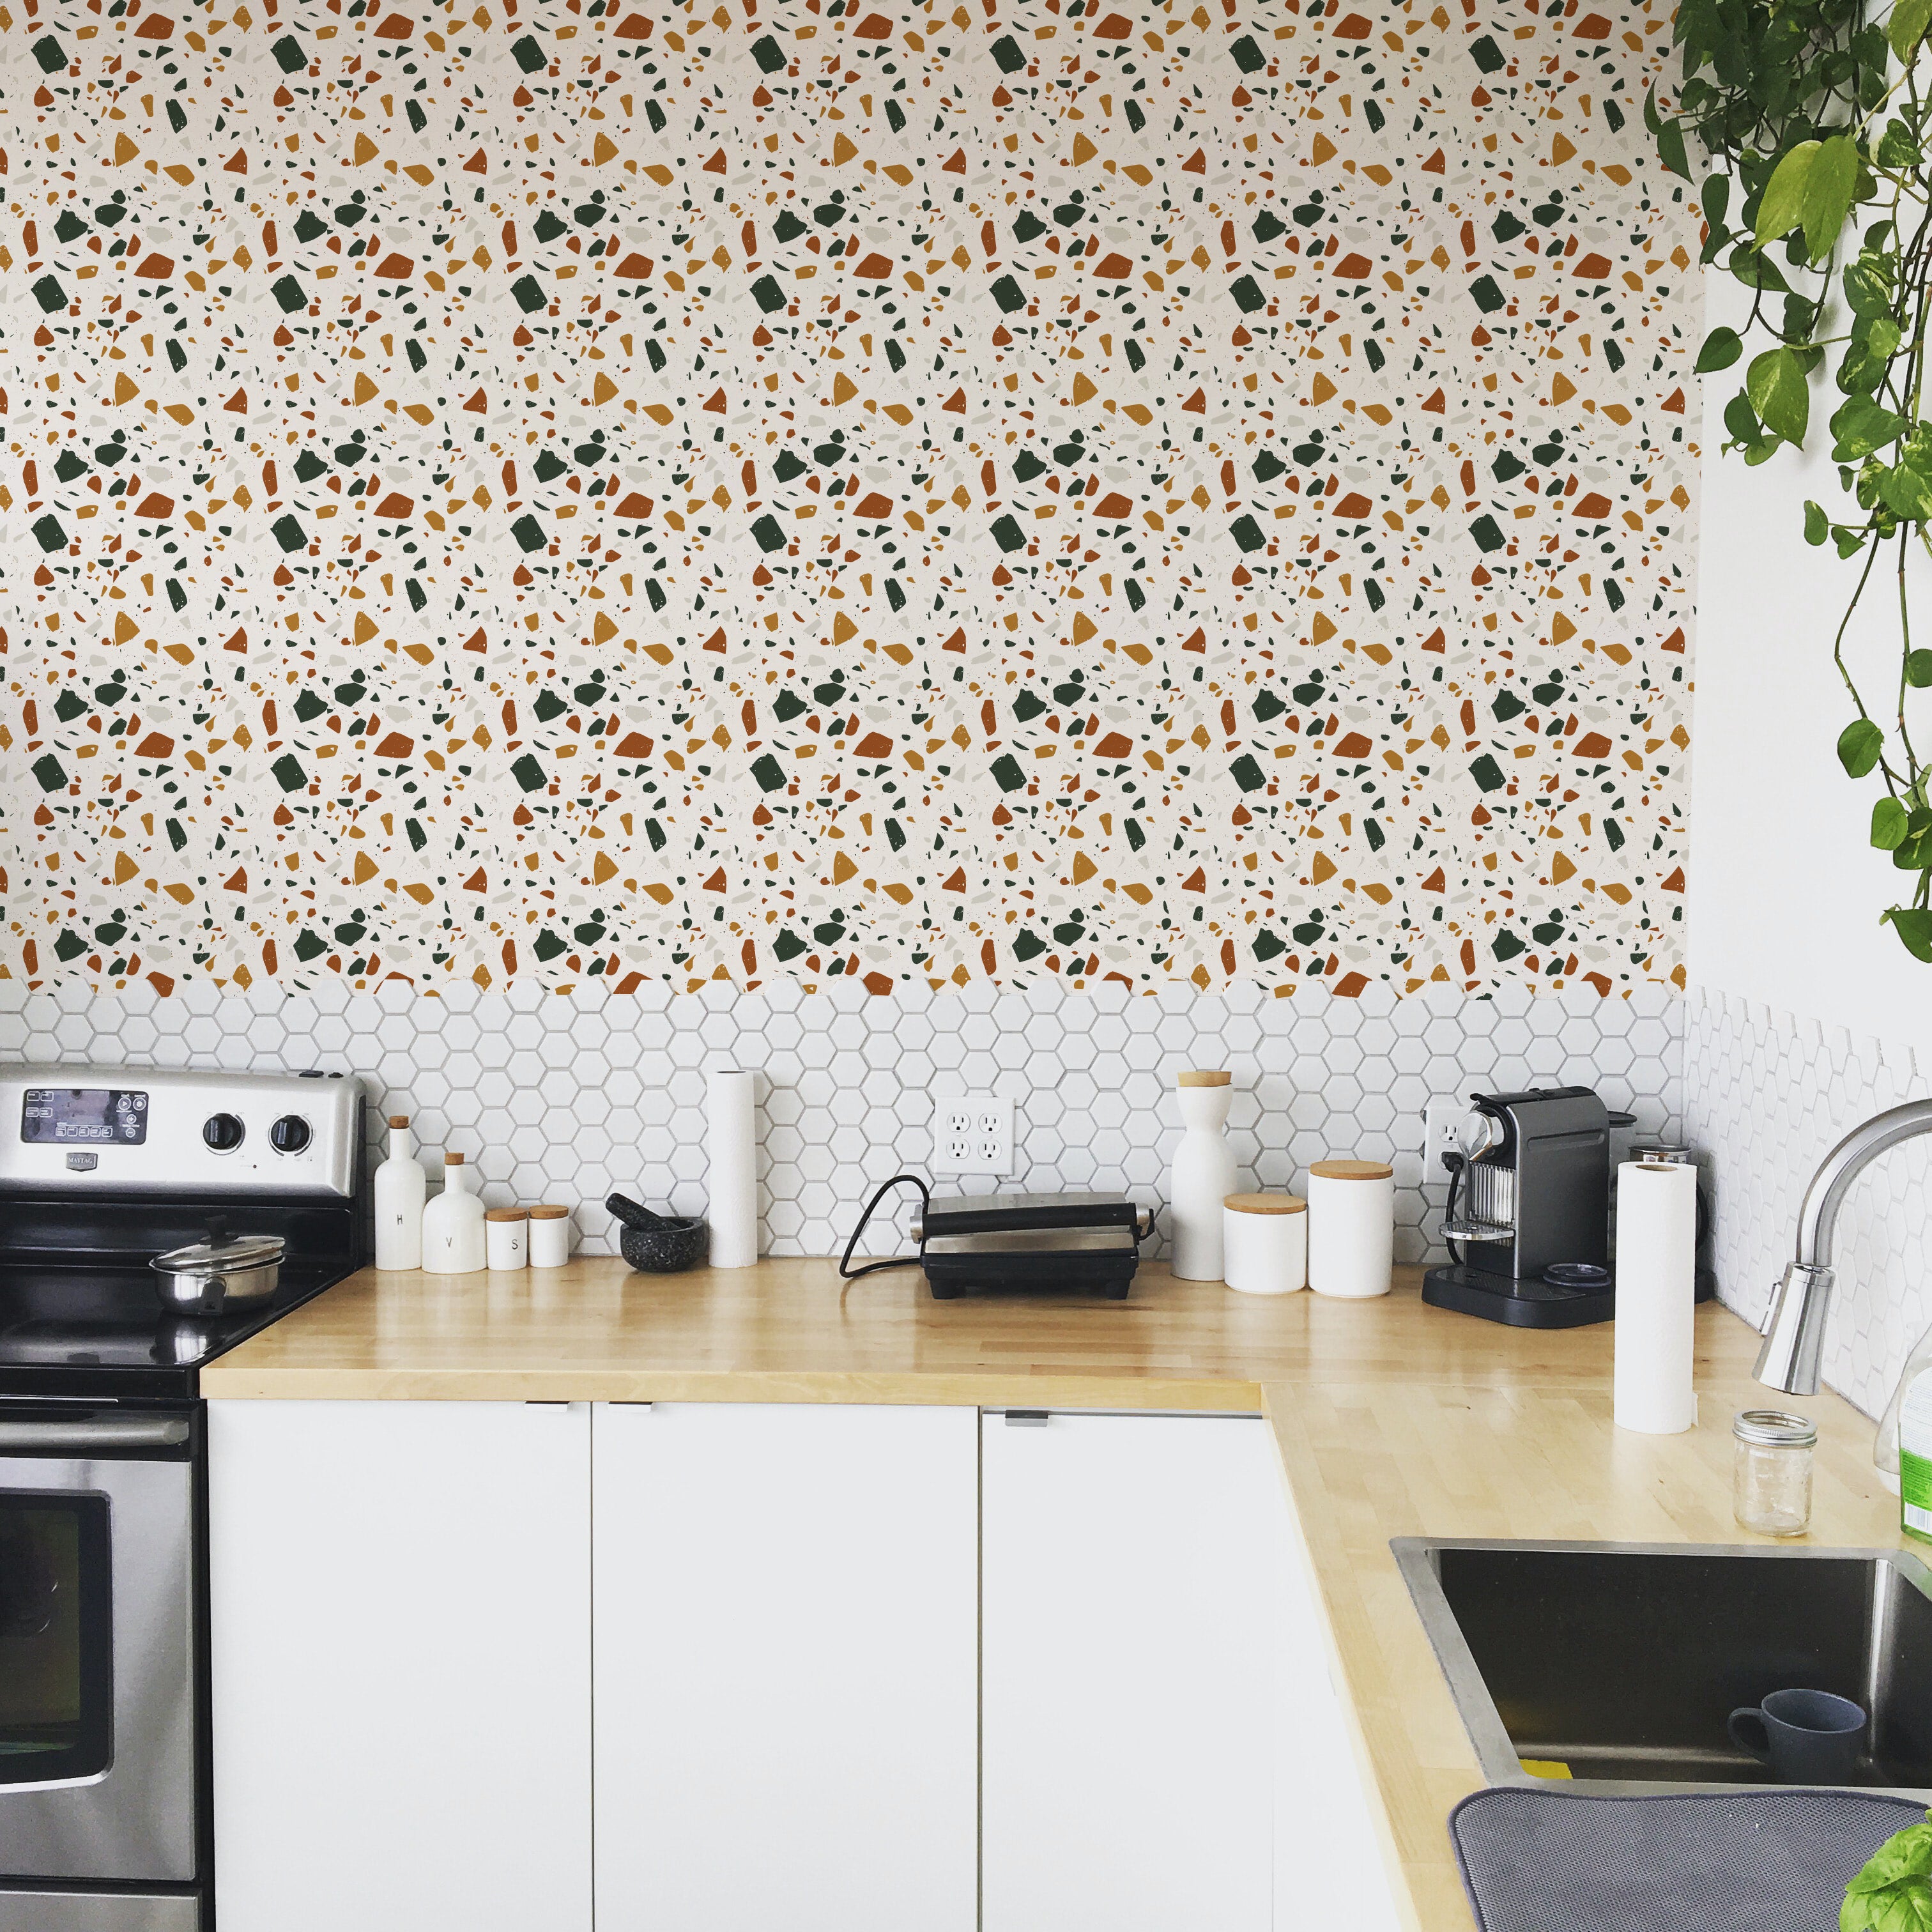 A kitchen backsplash covered with Earthy Terrazzo wallpaper, showing a vibrant and colorful pattern of orange, green, and gray specks on a white background, complemented by white cabinetry and modern kitchen appliances.